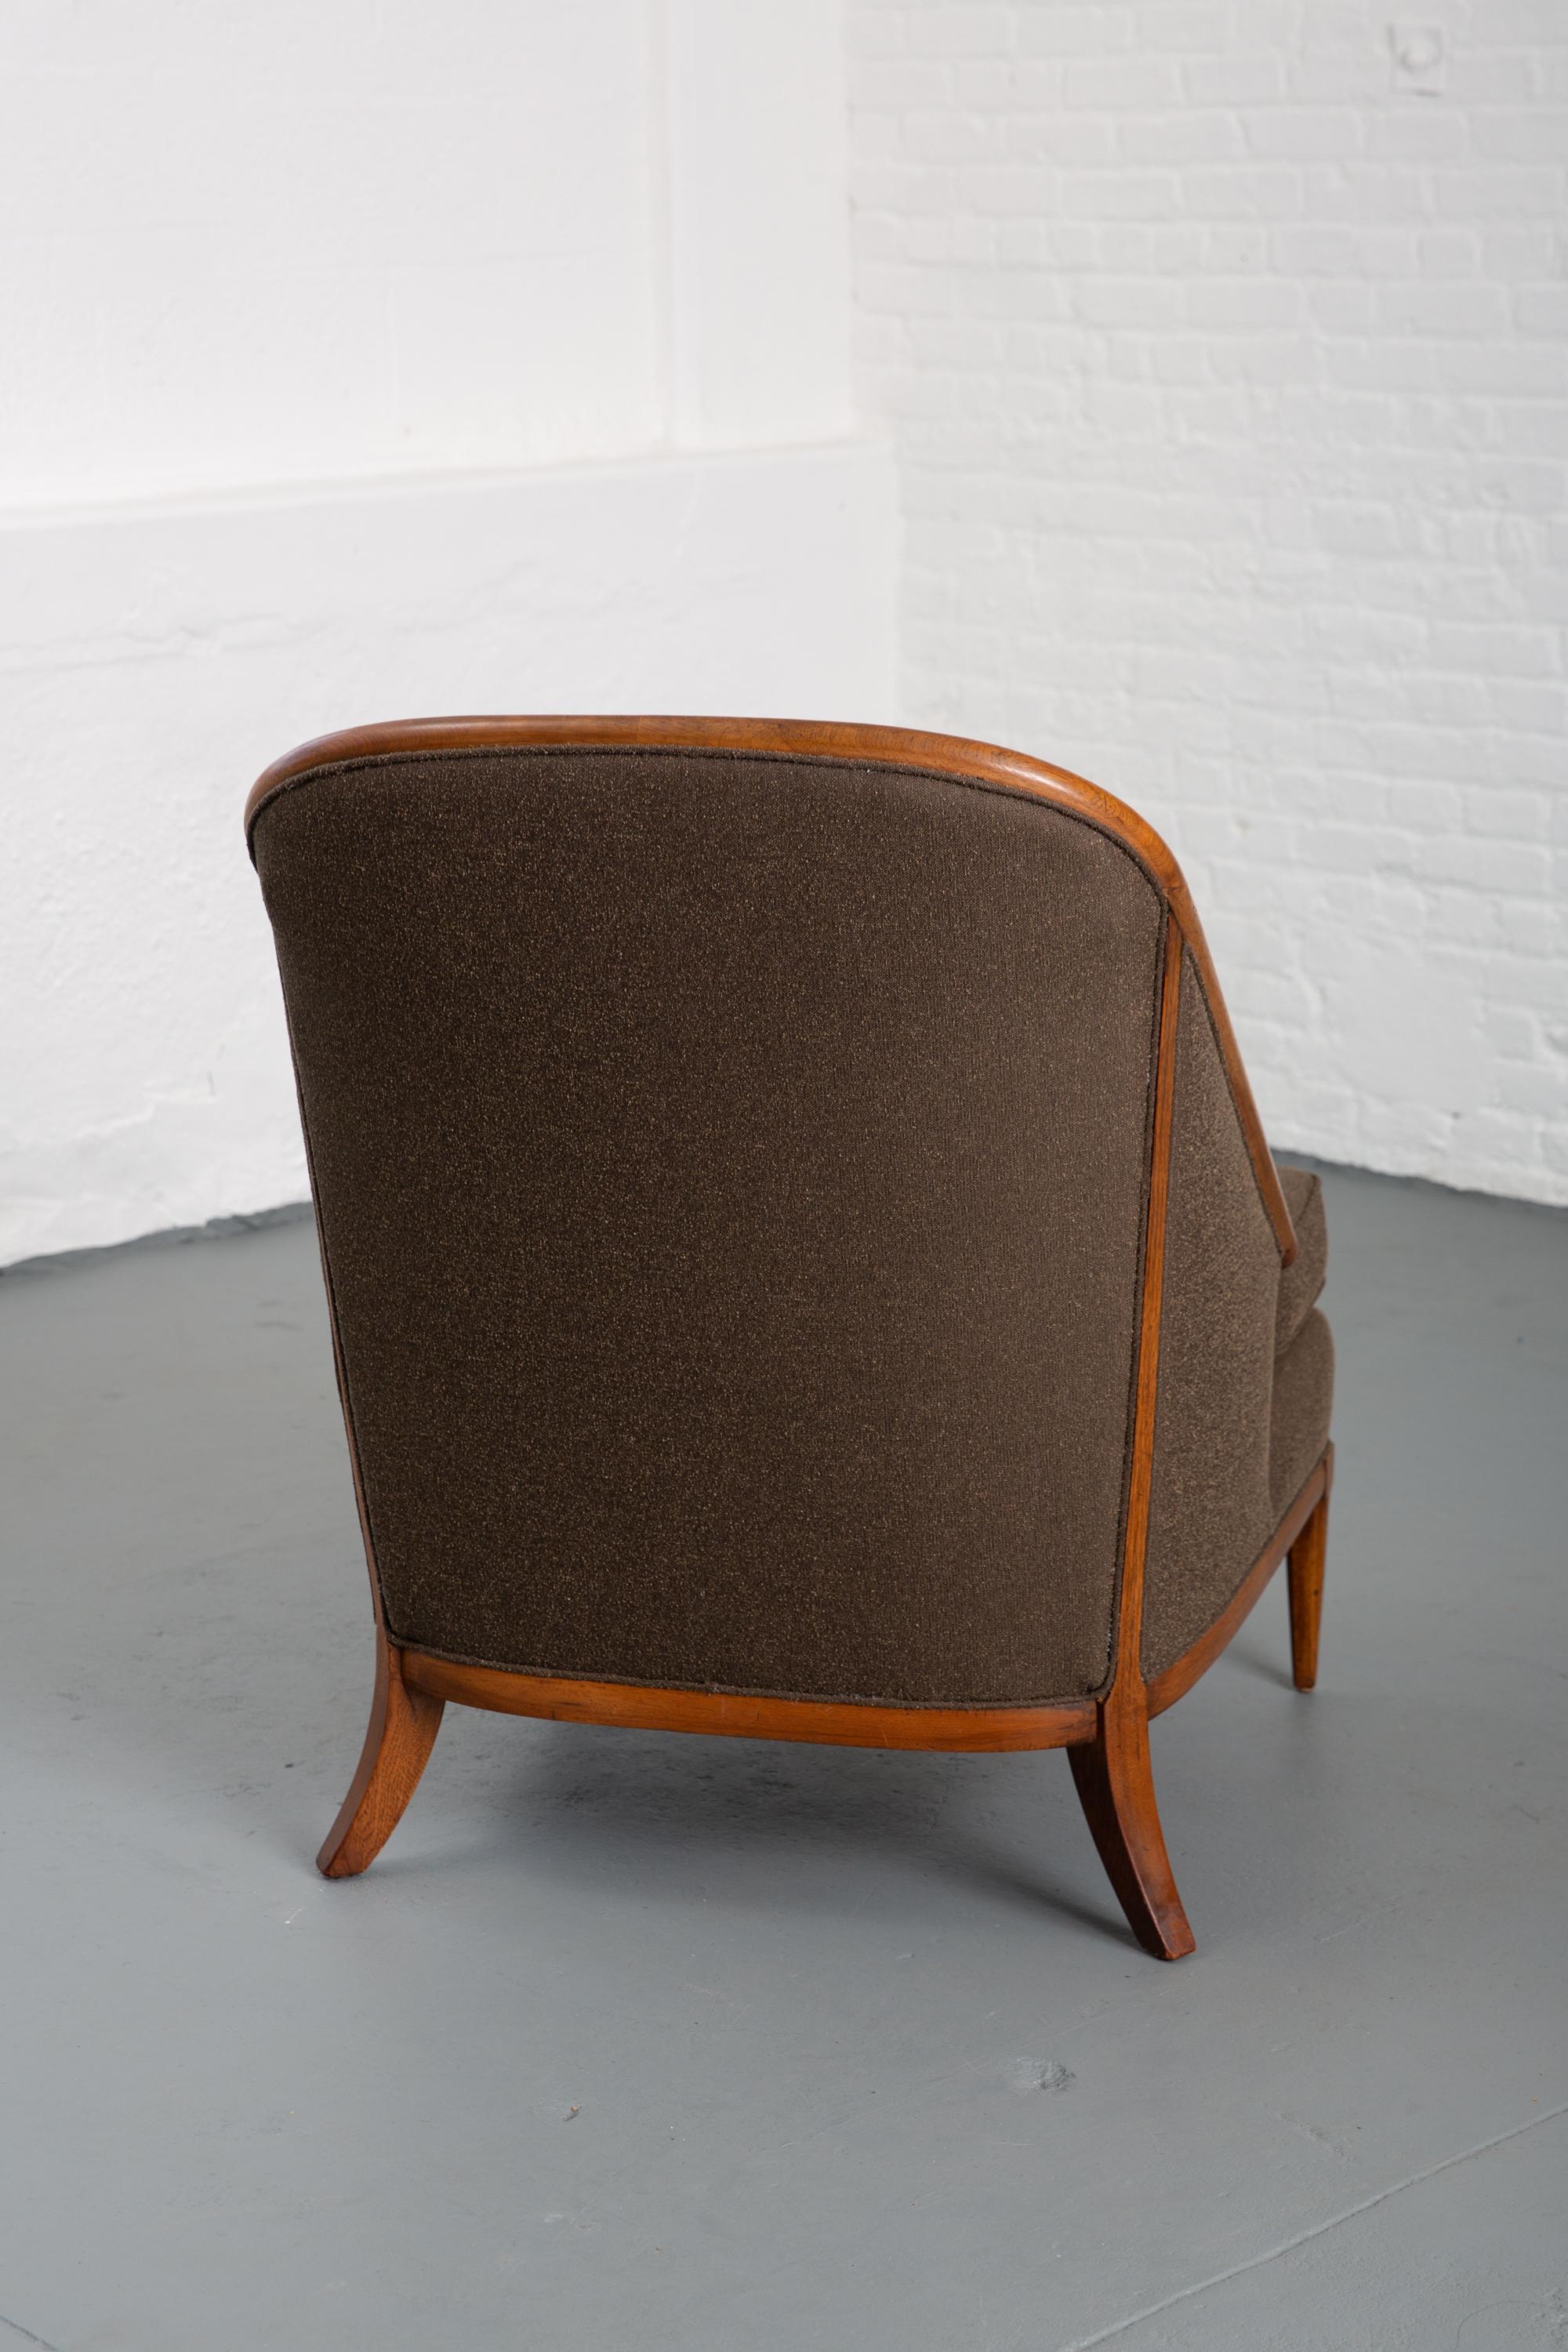 Newly Upholstered Mid-Century Modern Lounge Chair Attributed to Widdicomb 4